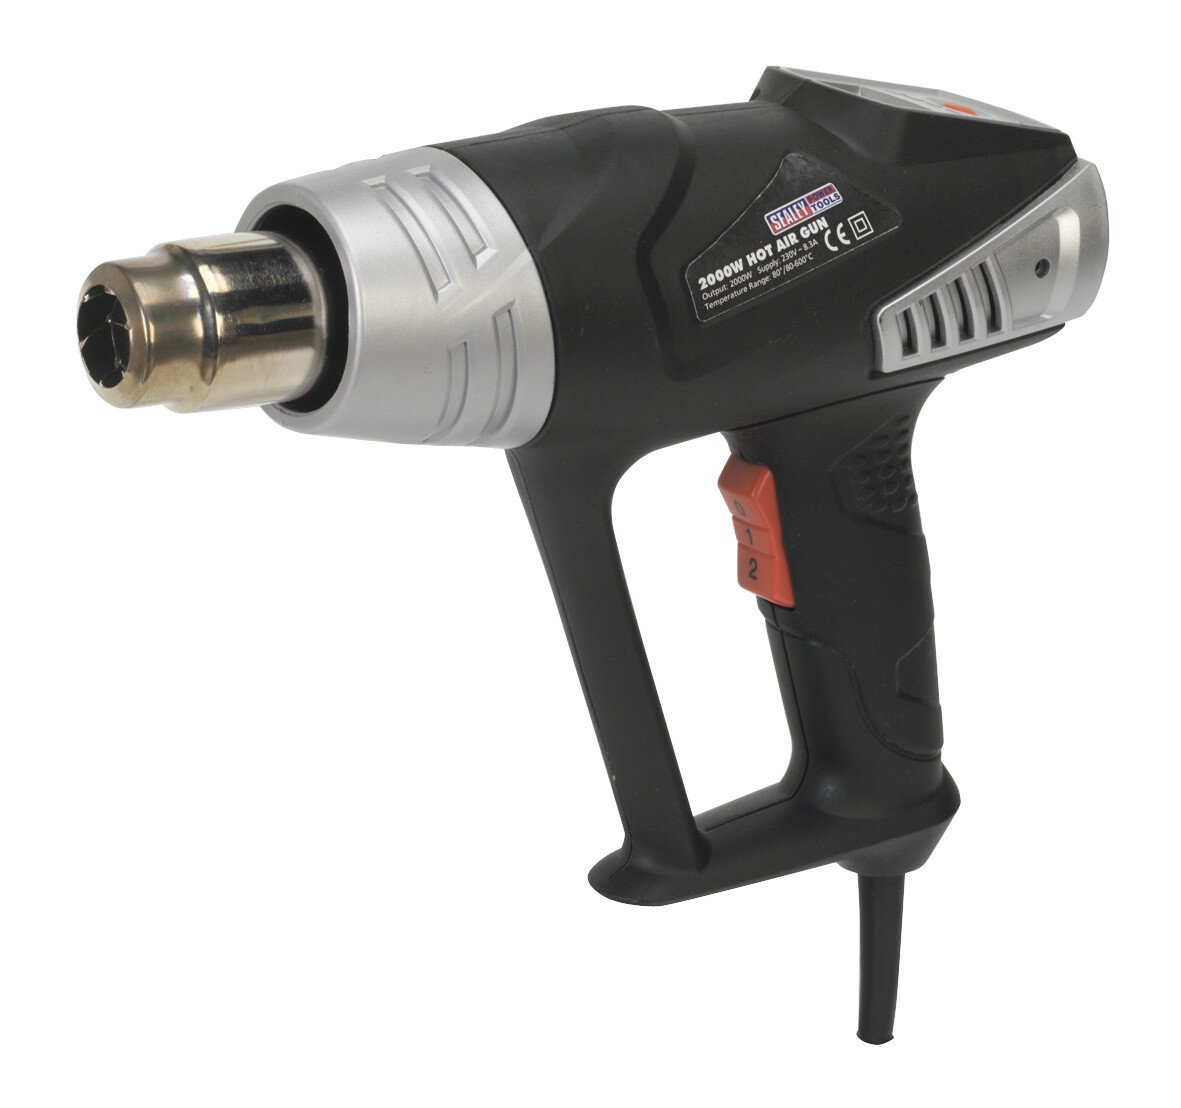 Sealey HS104K Deluxe Hot Air Gun Kit with LED Display